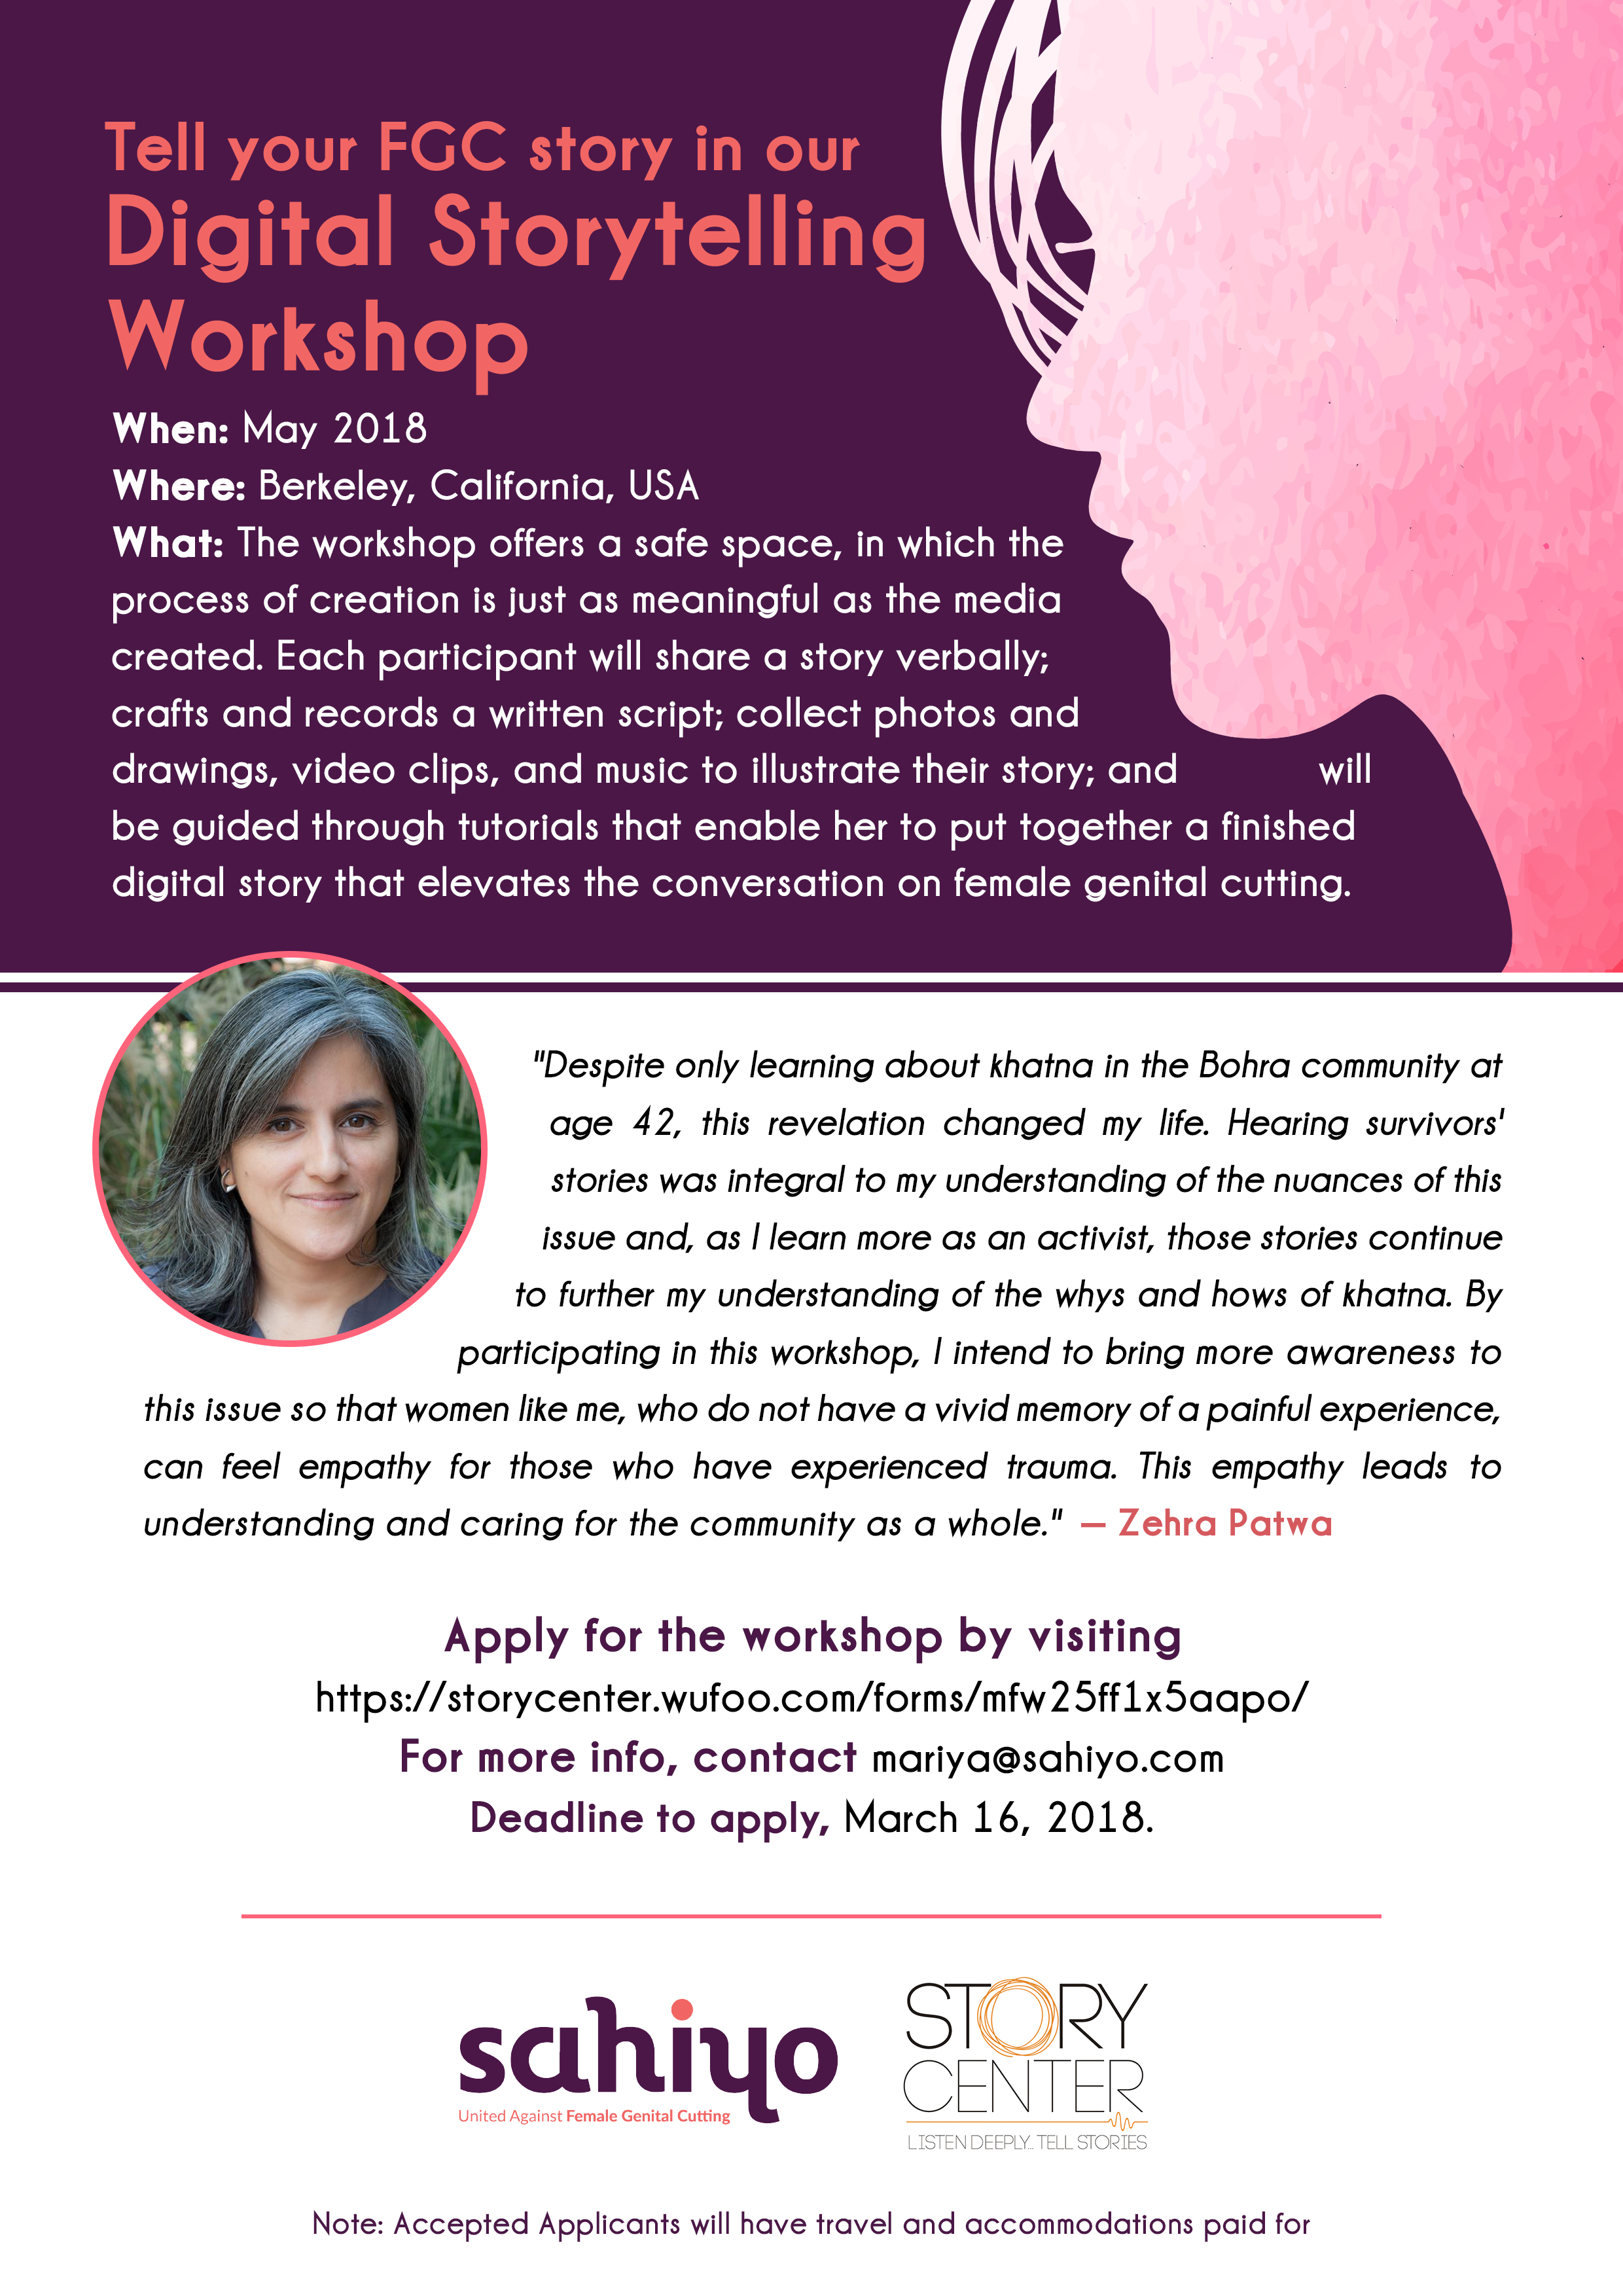 Sahiyo in the U.S. presents a workshop opportunity in May 2018 in collaboration with StoryCenter